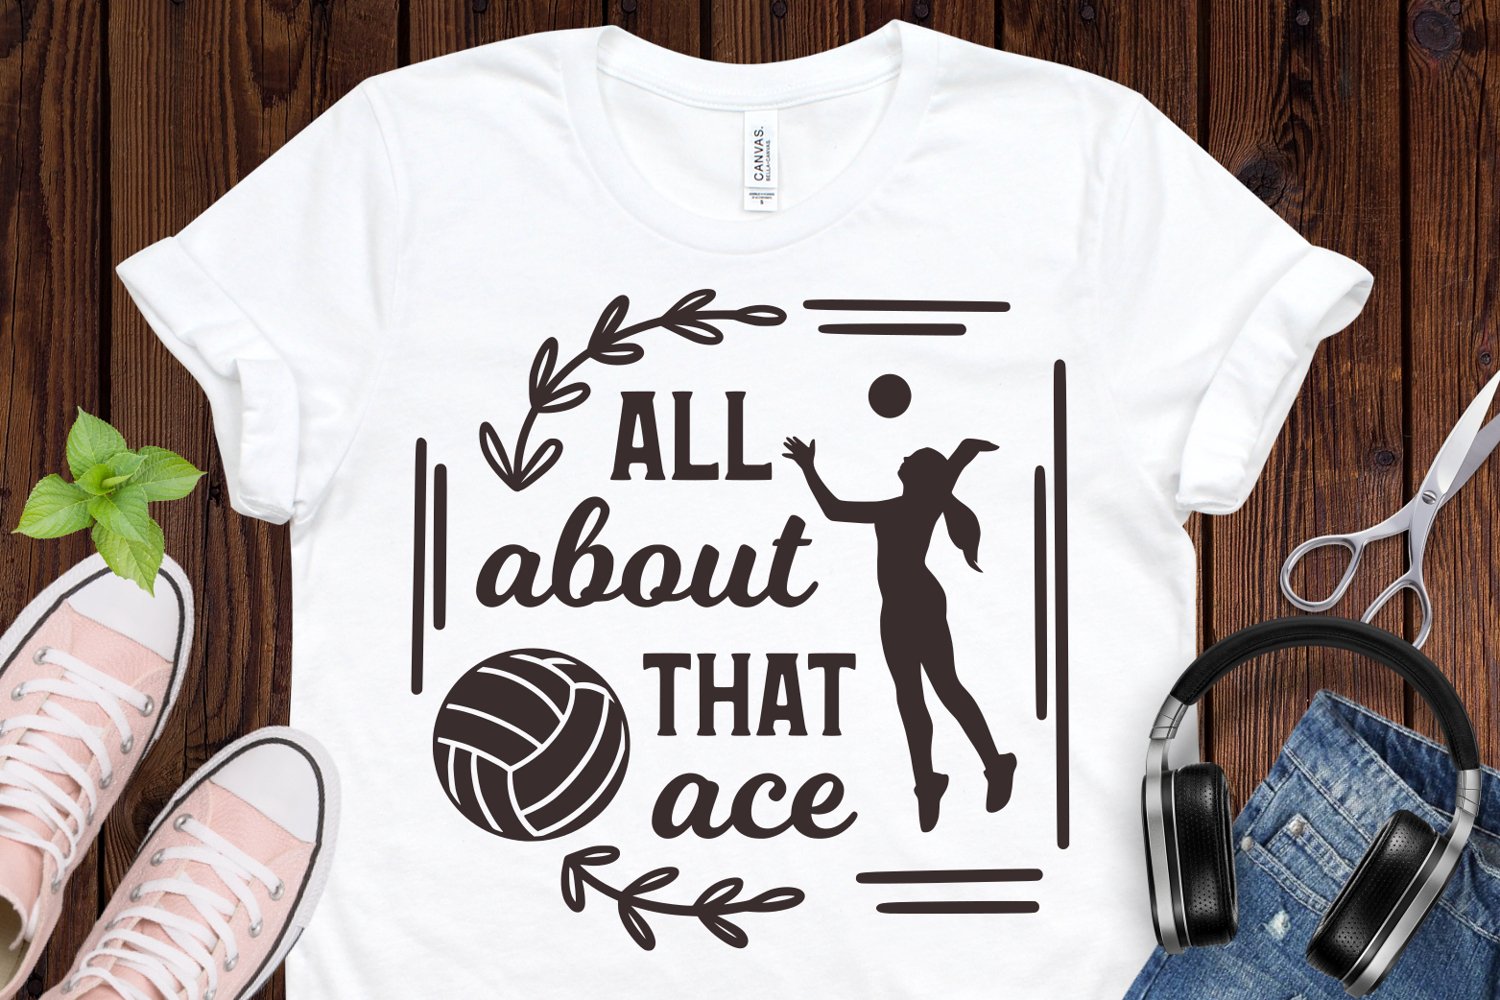 Volleyball is all about that ace.